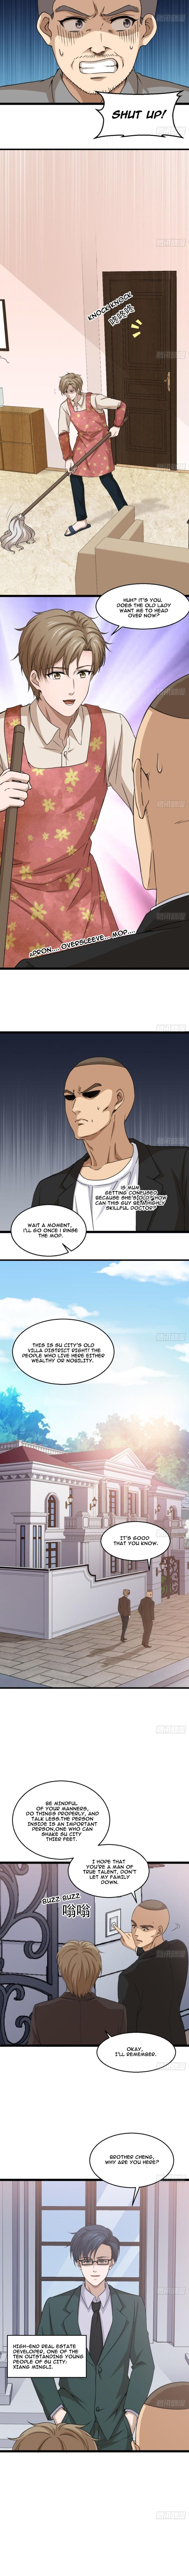 Capital’s most crazy doctor Chapter 8 - Page 3